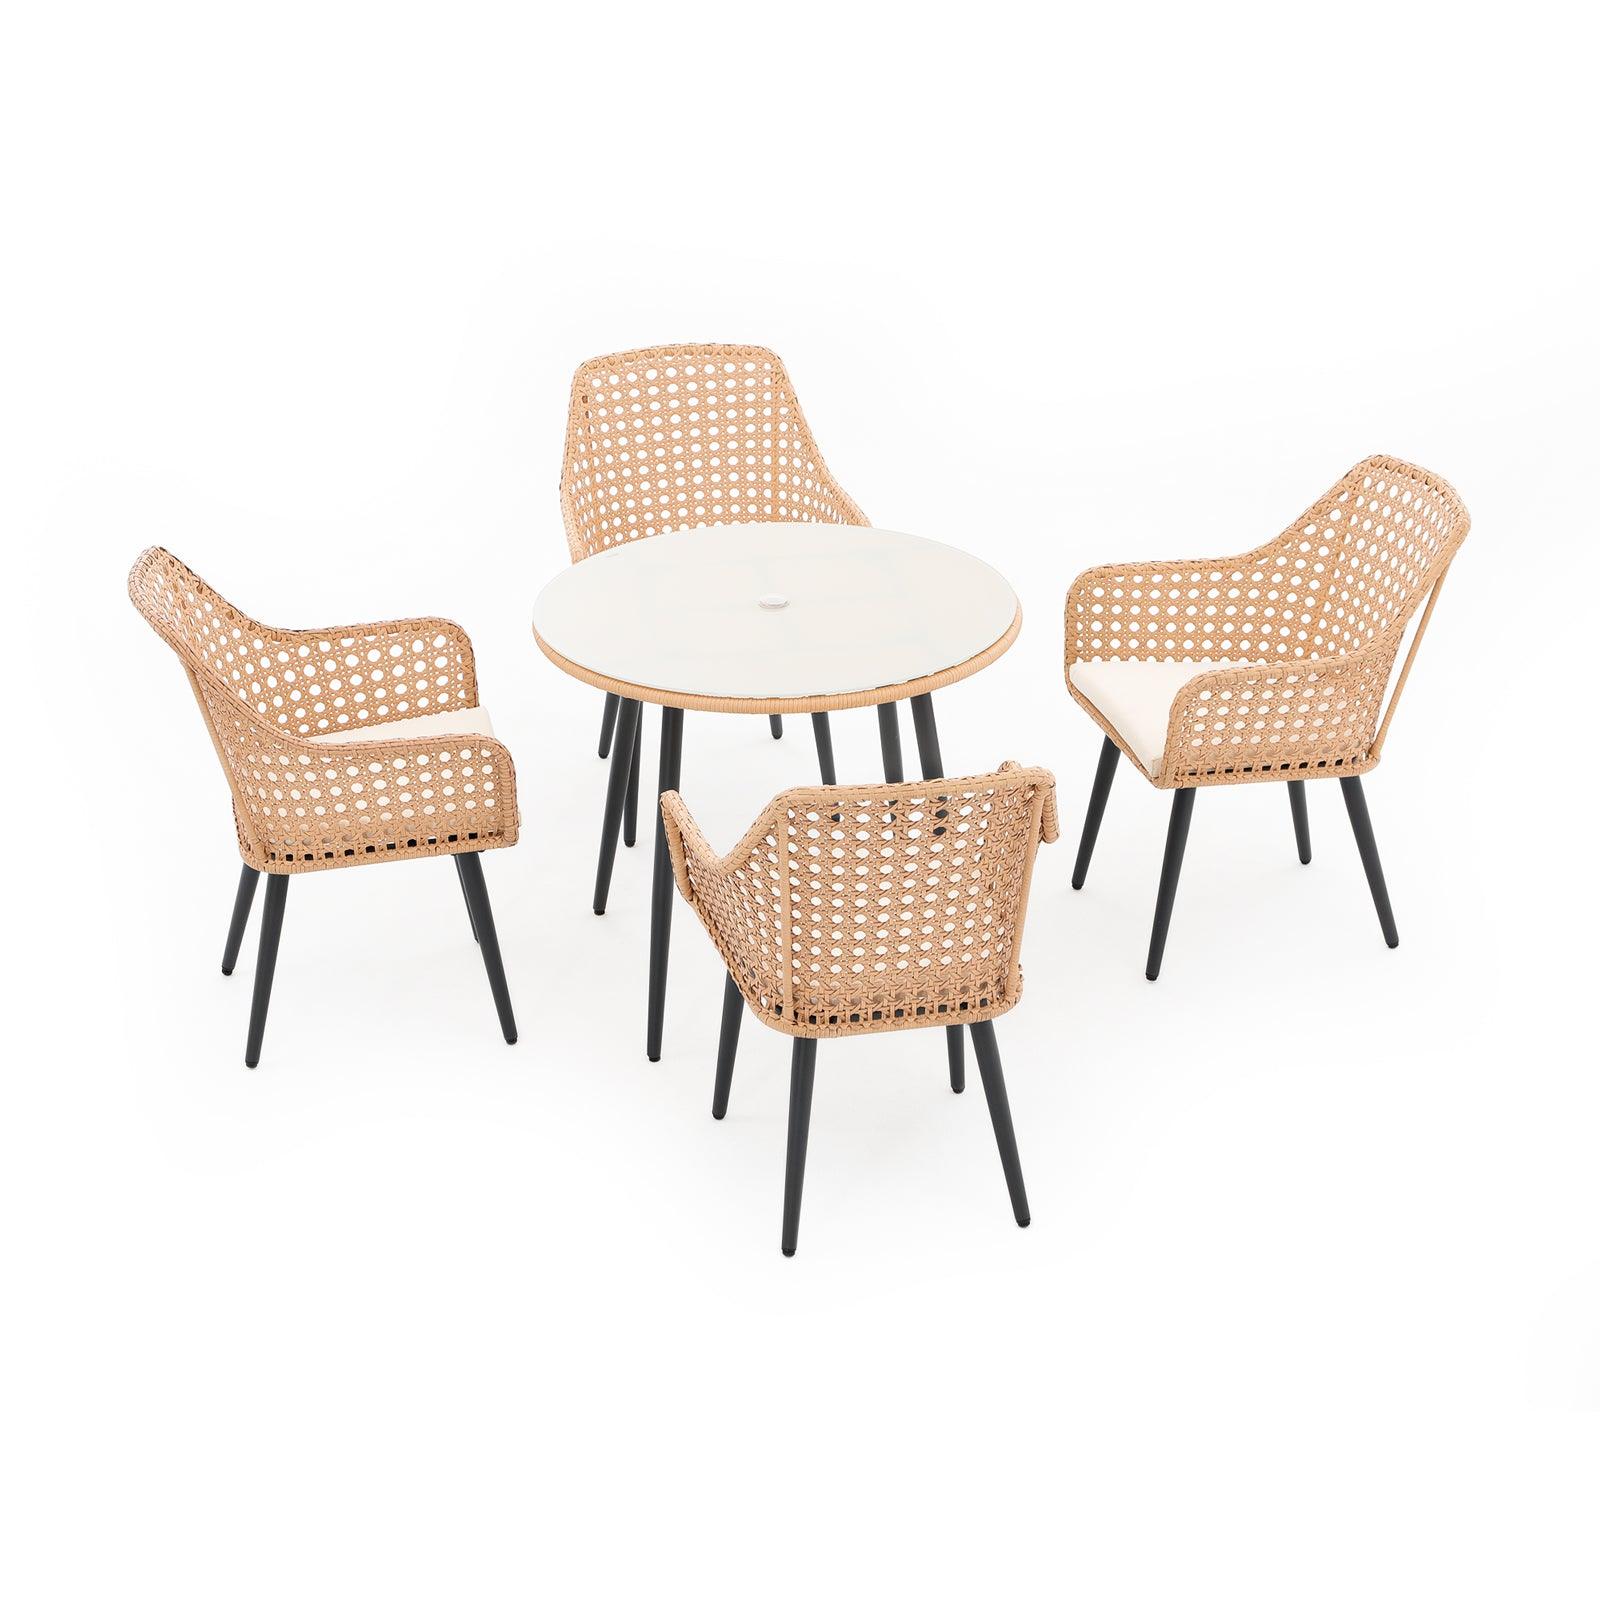 Menorca Modern Wicker Outdoor Dining Set for 4, Round Shape, Tempered Glass, White Cushions- Jardina Furniture